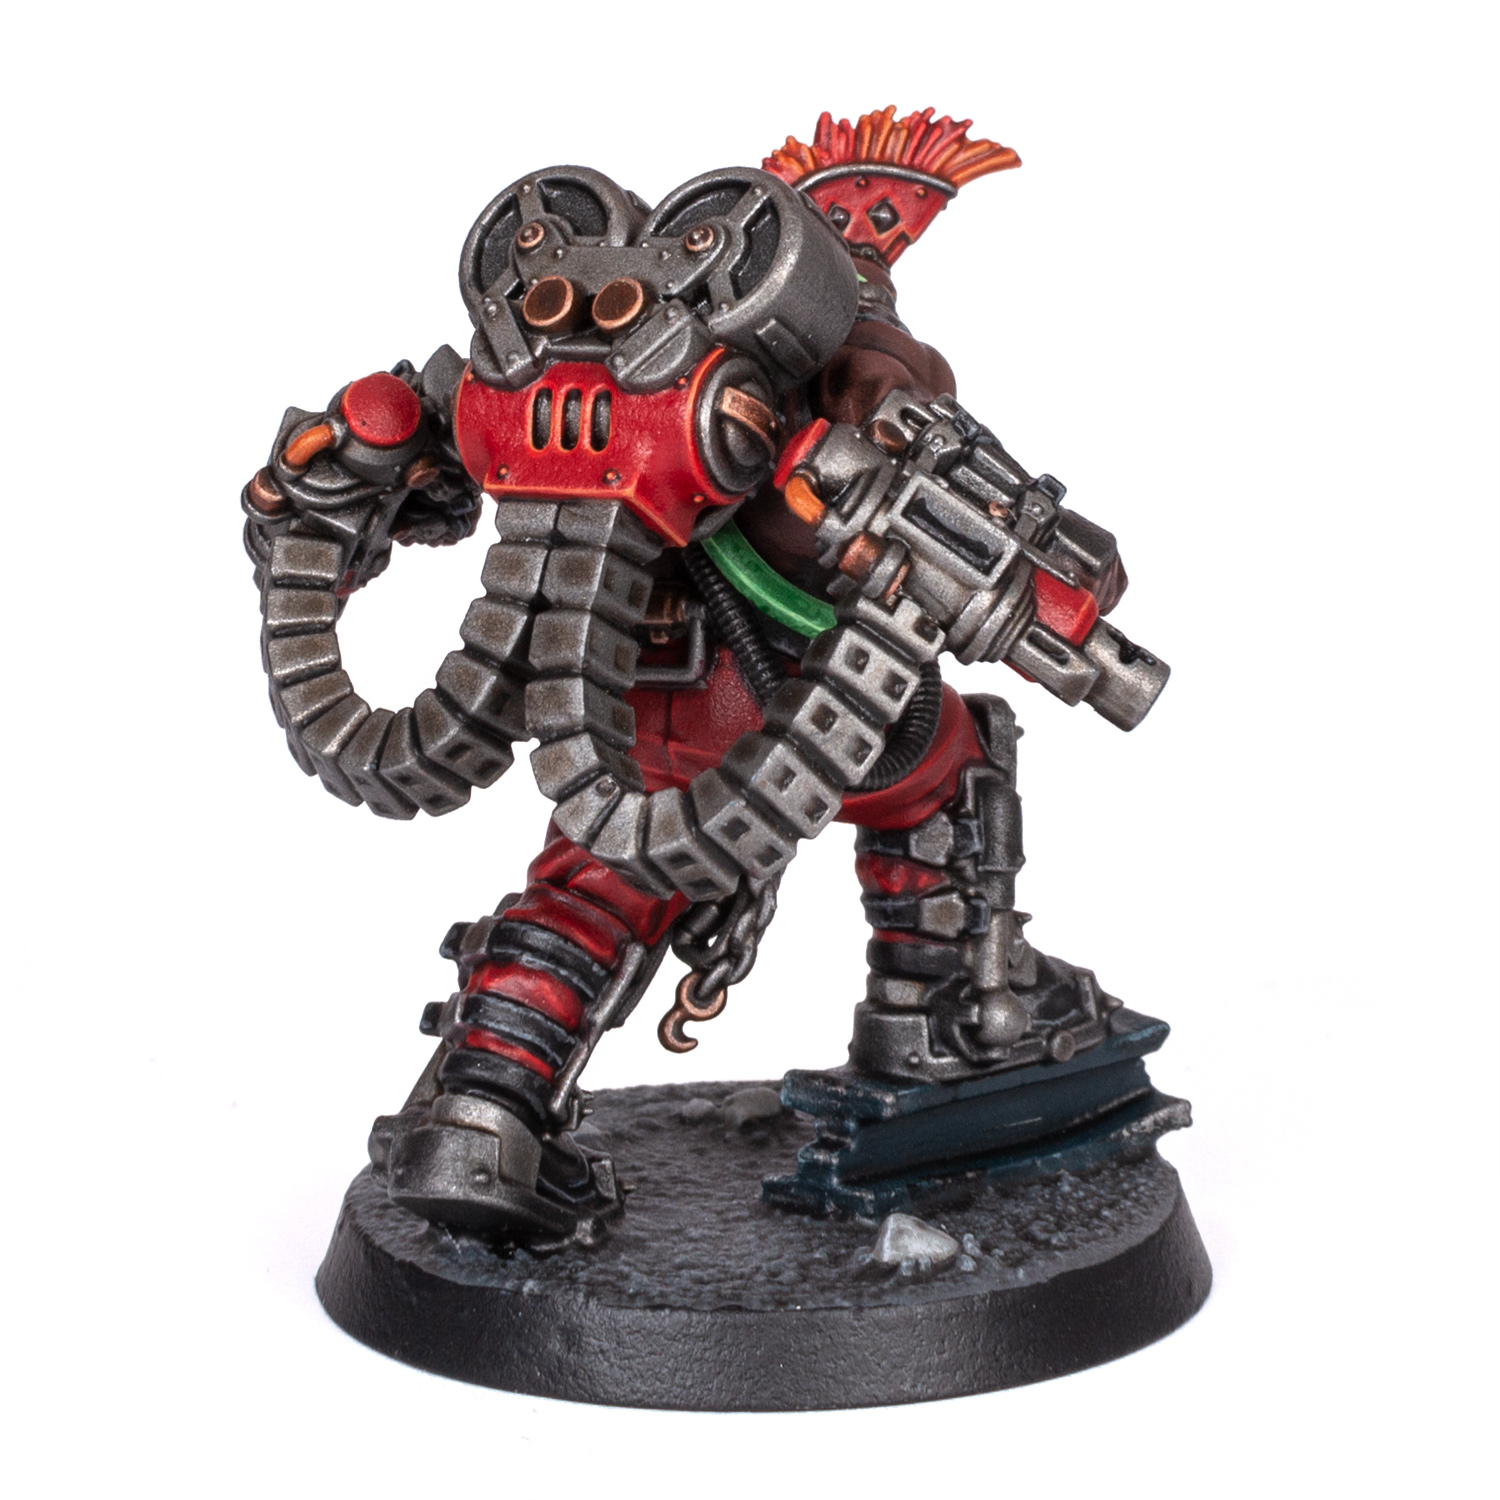 Goliath Stimmer for Necromunda, painted by Stahly